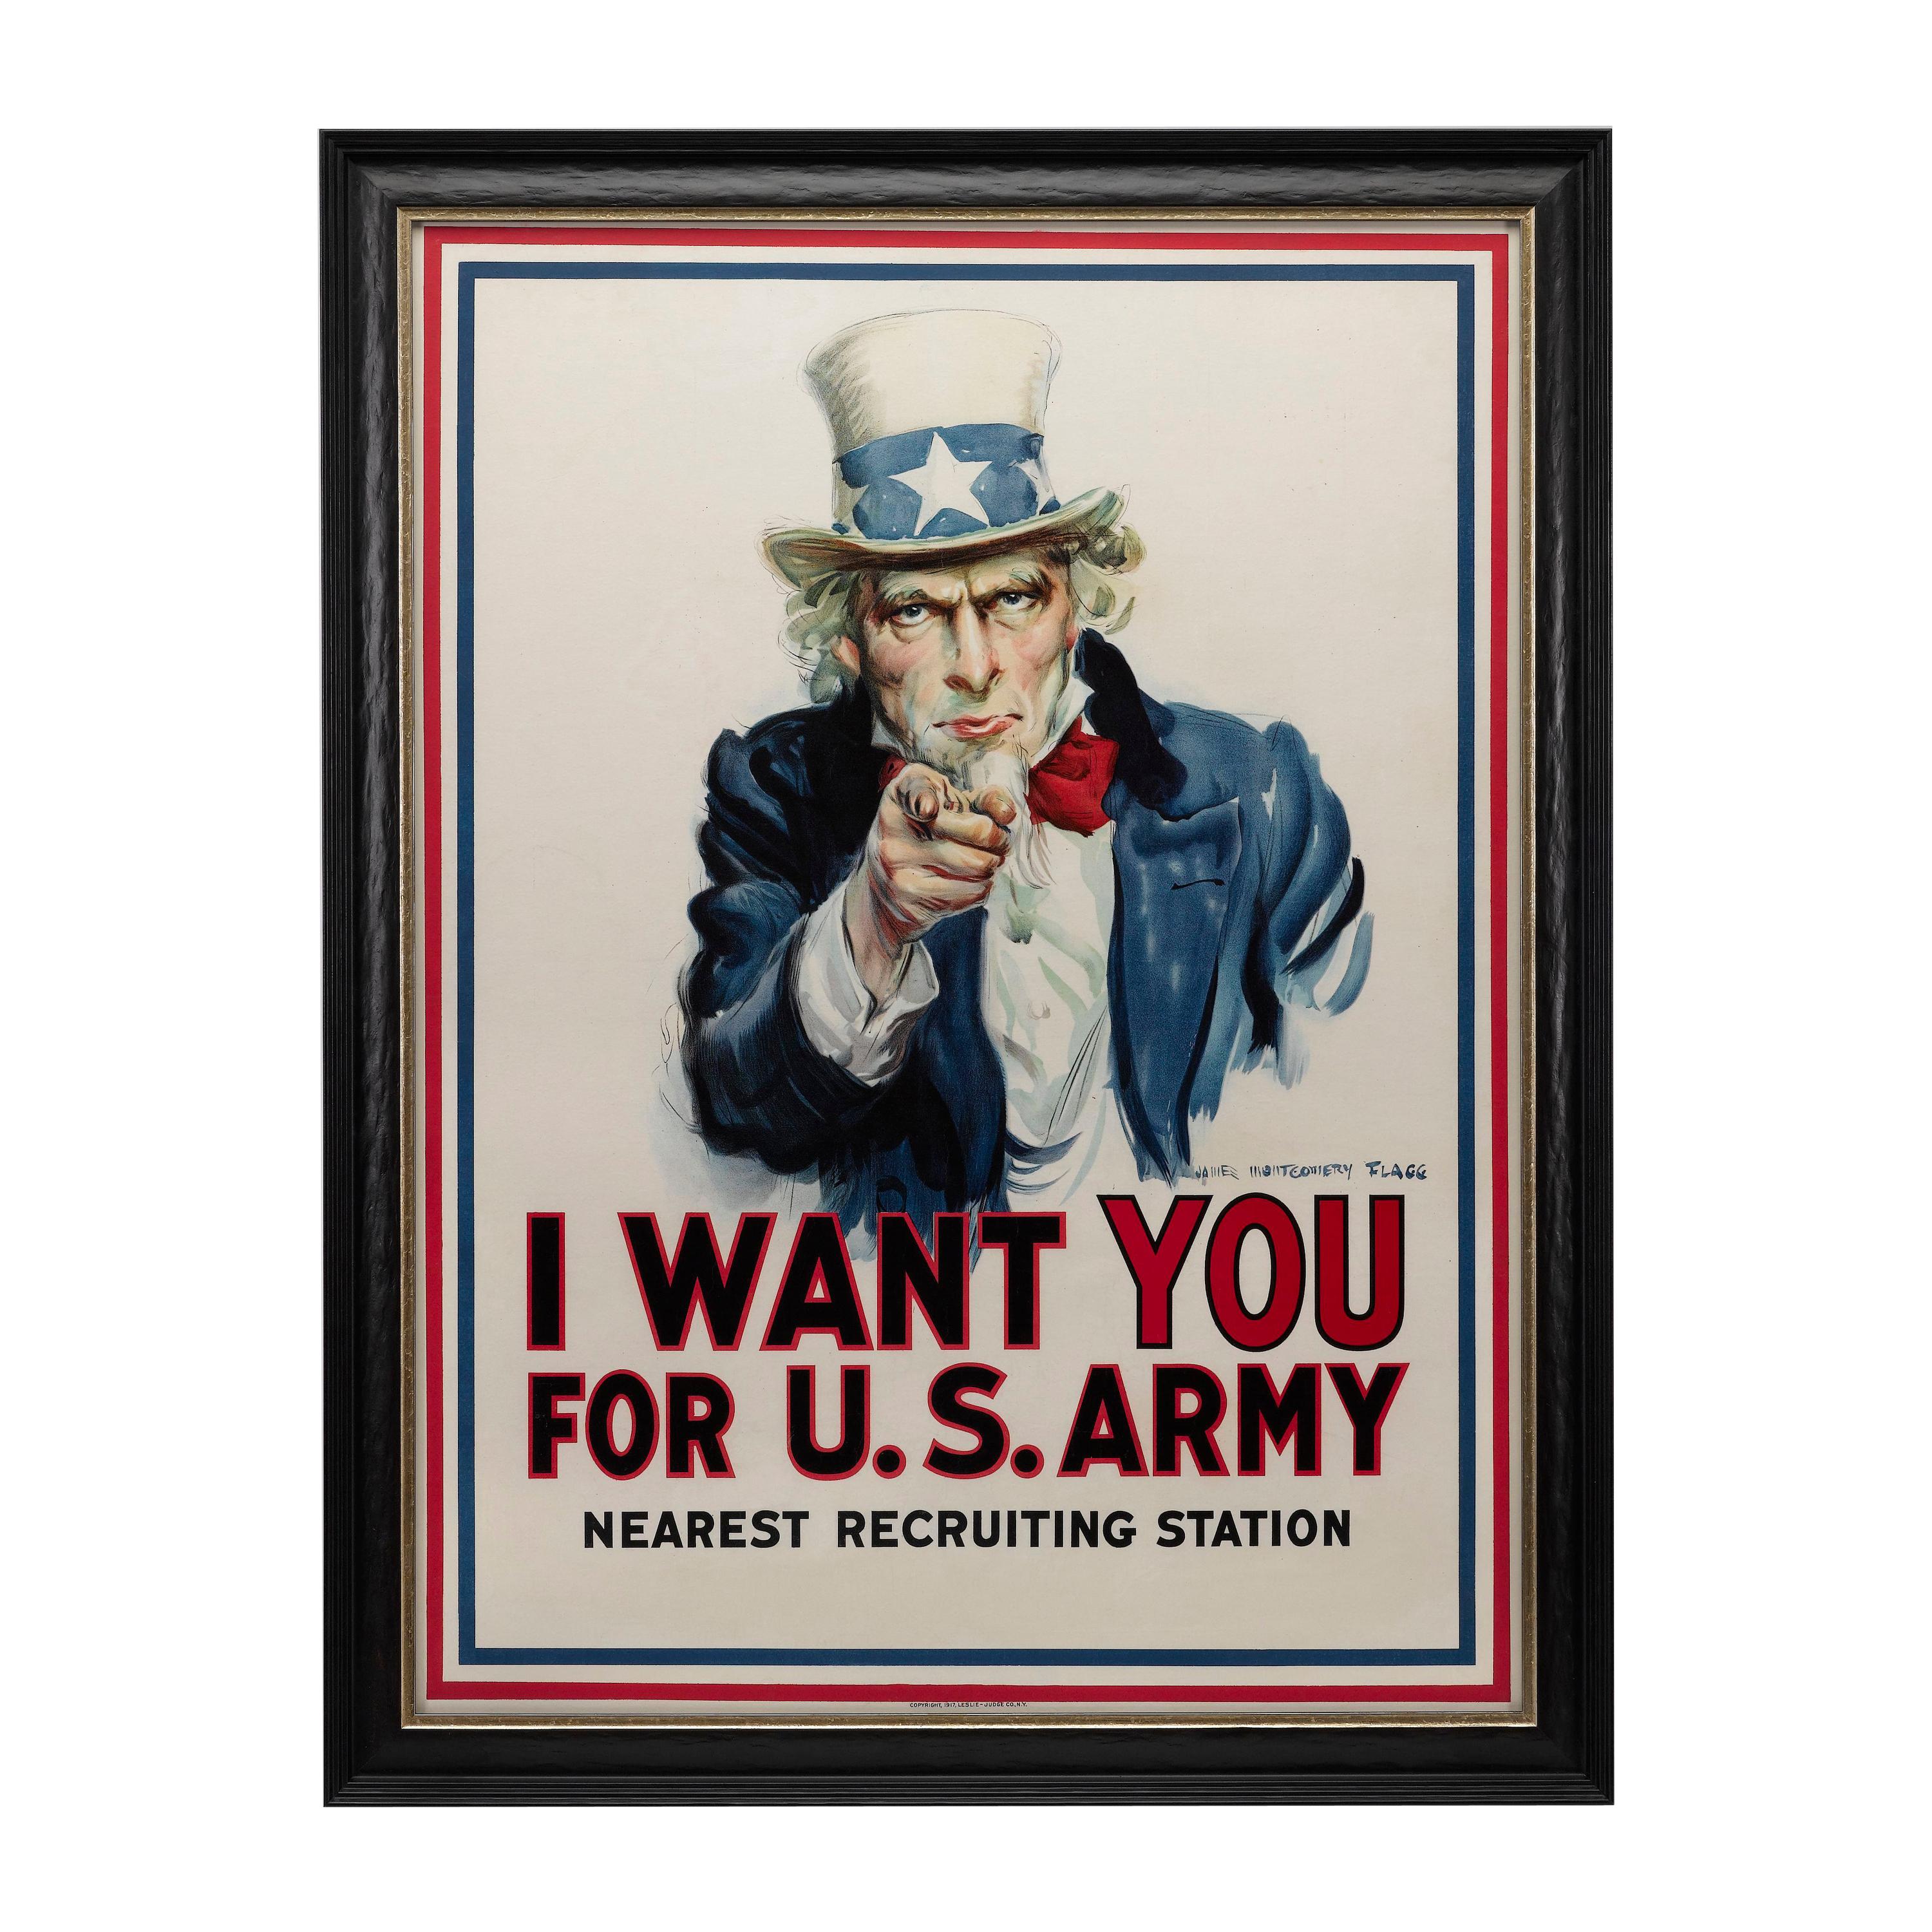 "I Want You for the U.S. Army" Original WWI Poster, James Montgomery Flagg, 1917